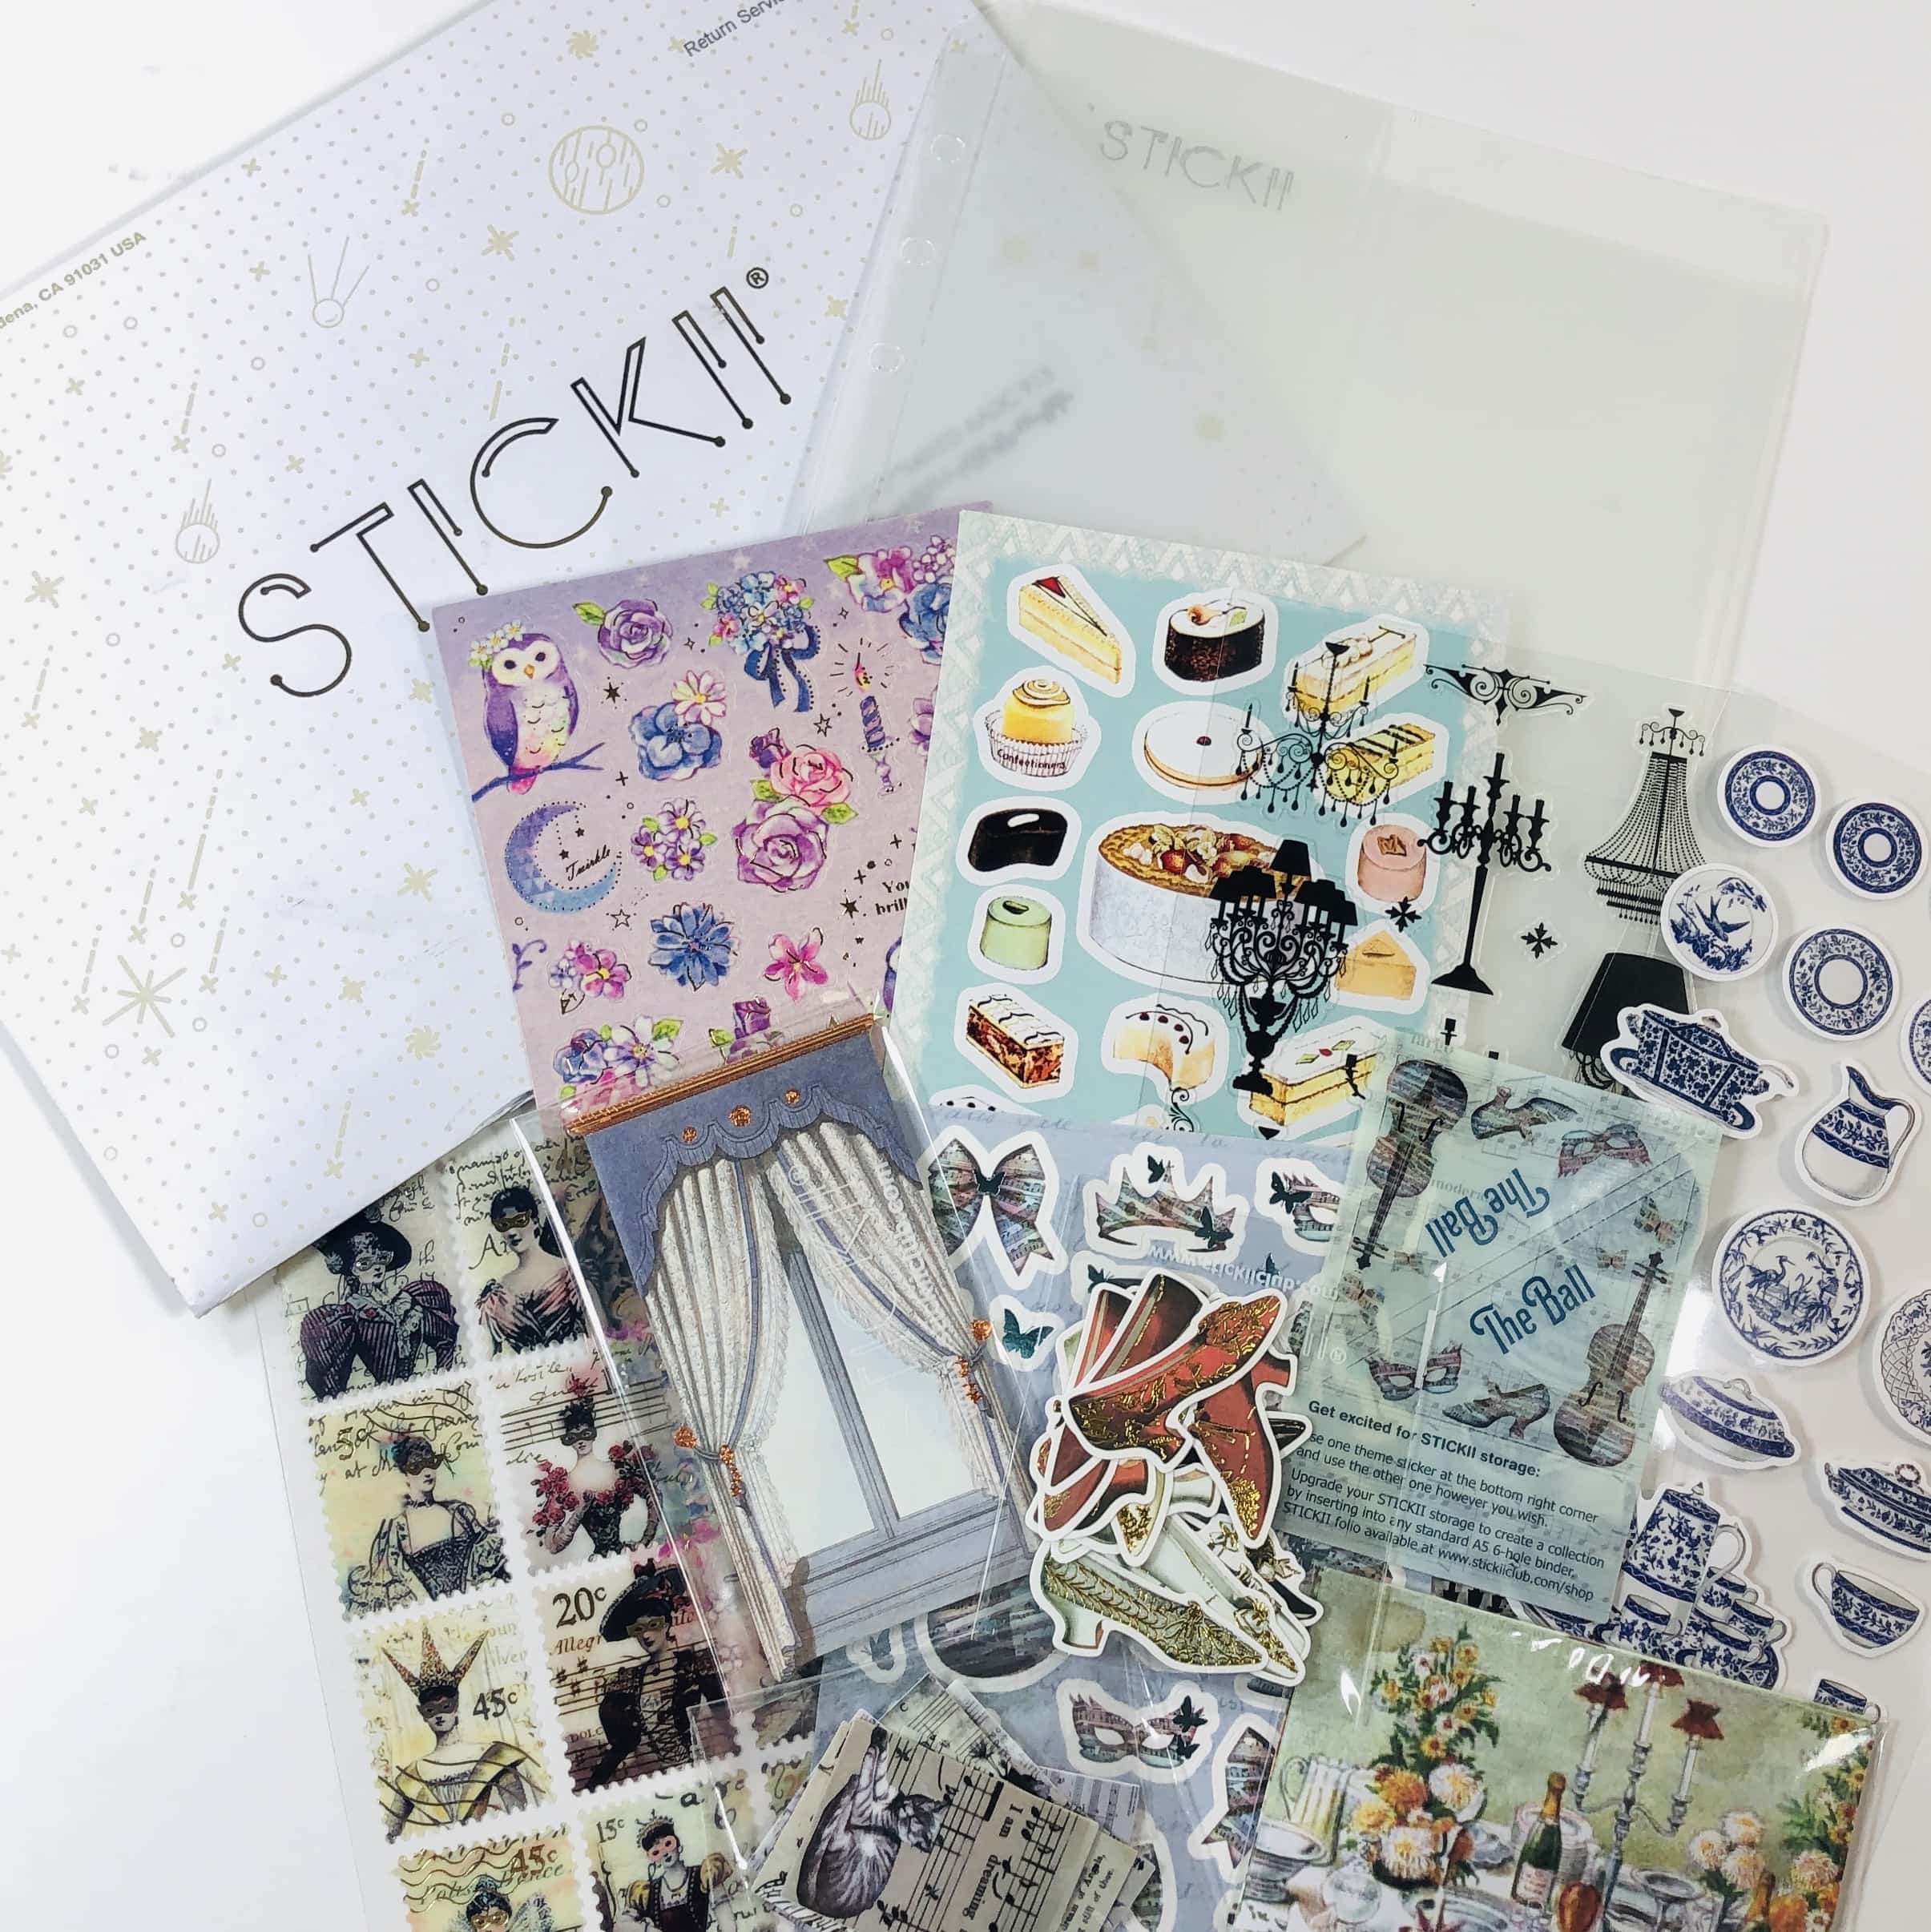 STICKII Club January 2020 Subscription Box Review - Retro Pack! - Hello  Subscription